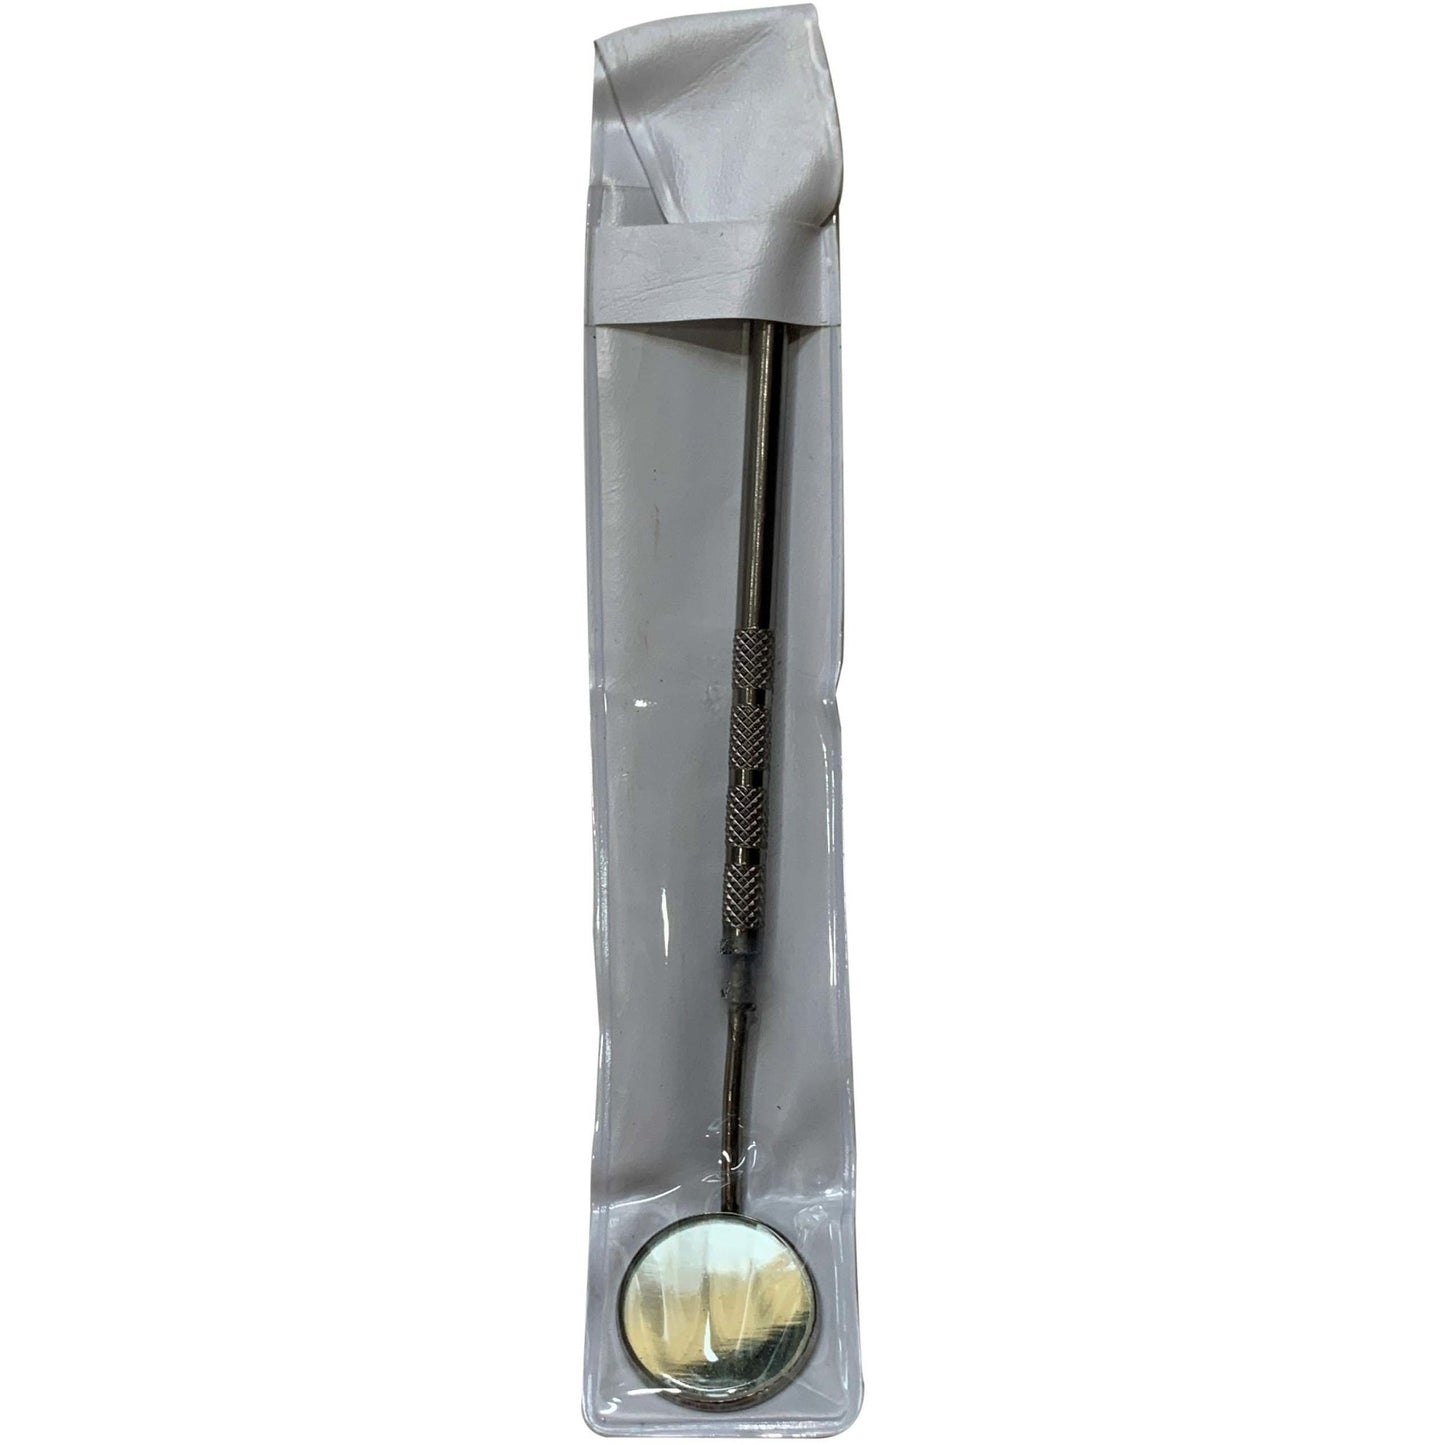 3/4" Diameter Dentist's Or Mult-use Inspection Mirror - 7" Long (Pack of: 2) - S1-EXT-08851-Z02 - ToolUSA